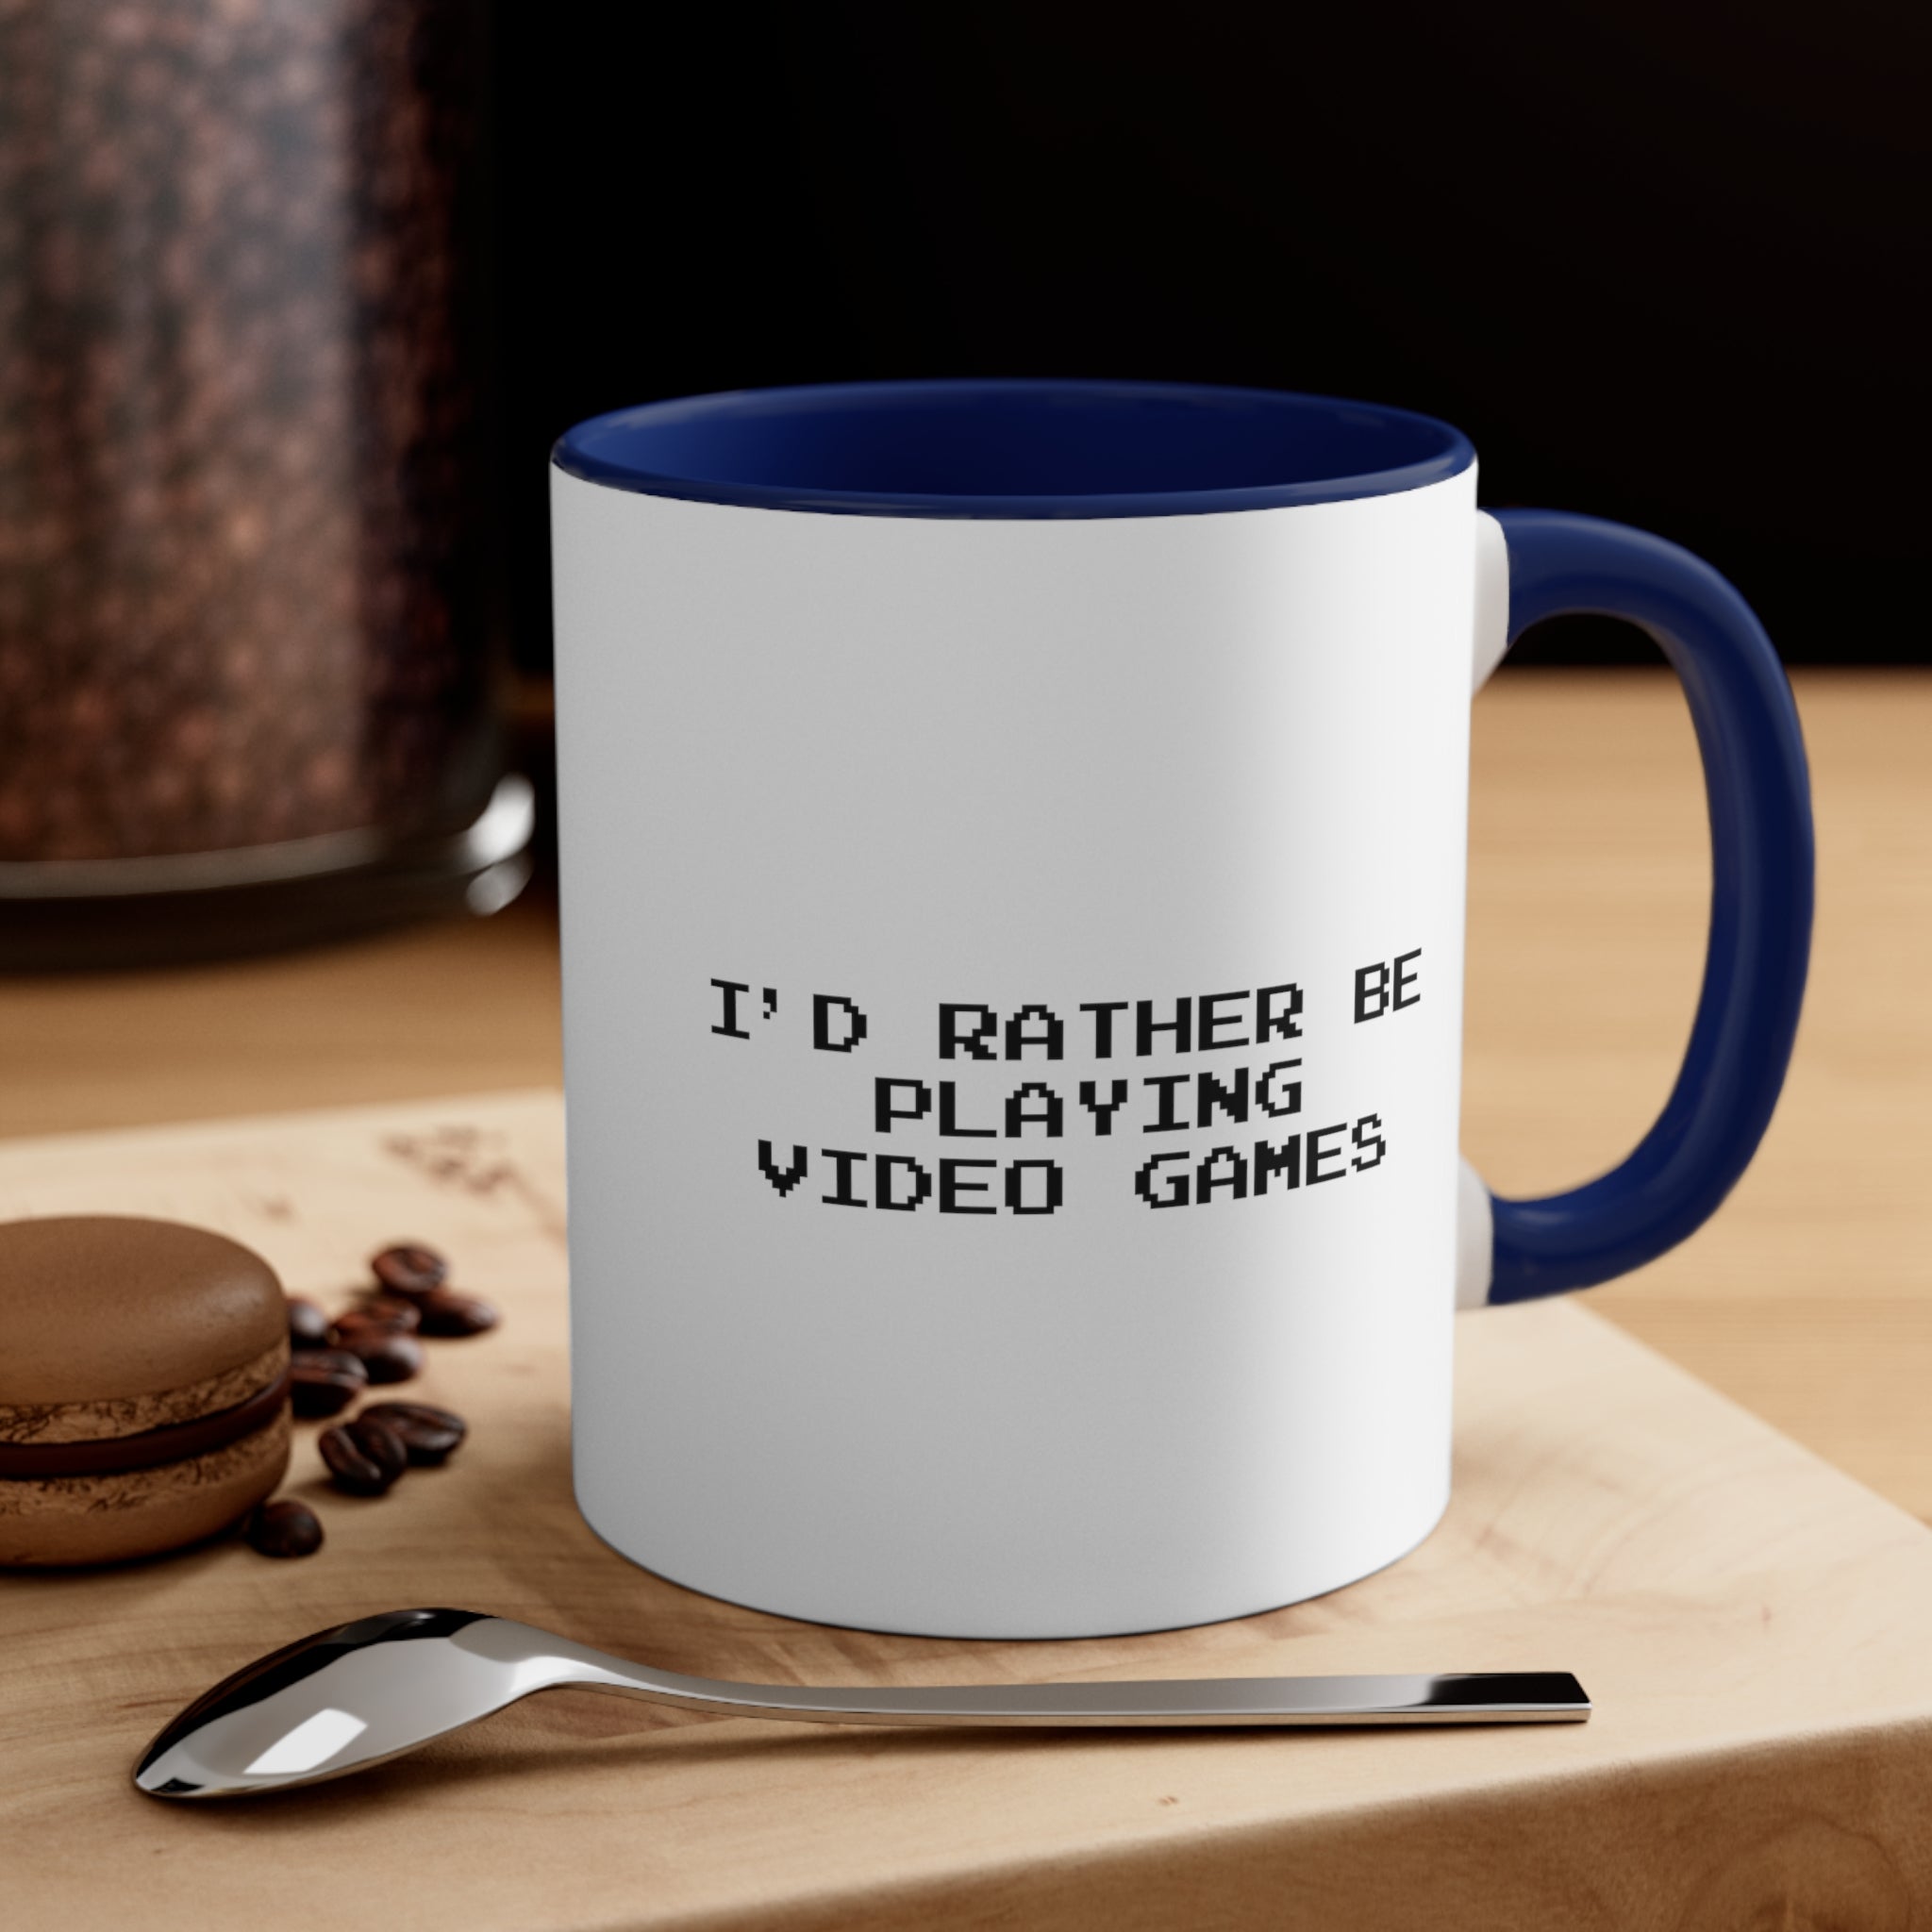 Video Games I'd Rather Be Playing Coffee Mug, 11oz cups mugs cup Gamer Gift For Him Her Game Cup Cups Mugs Birthday Christmas Valentine's Anniversary Gifts